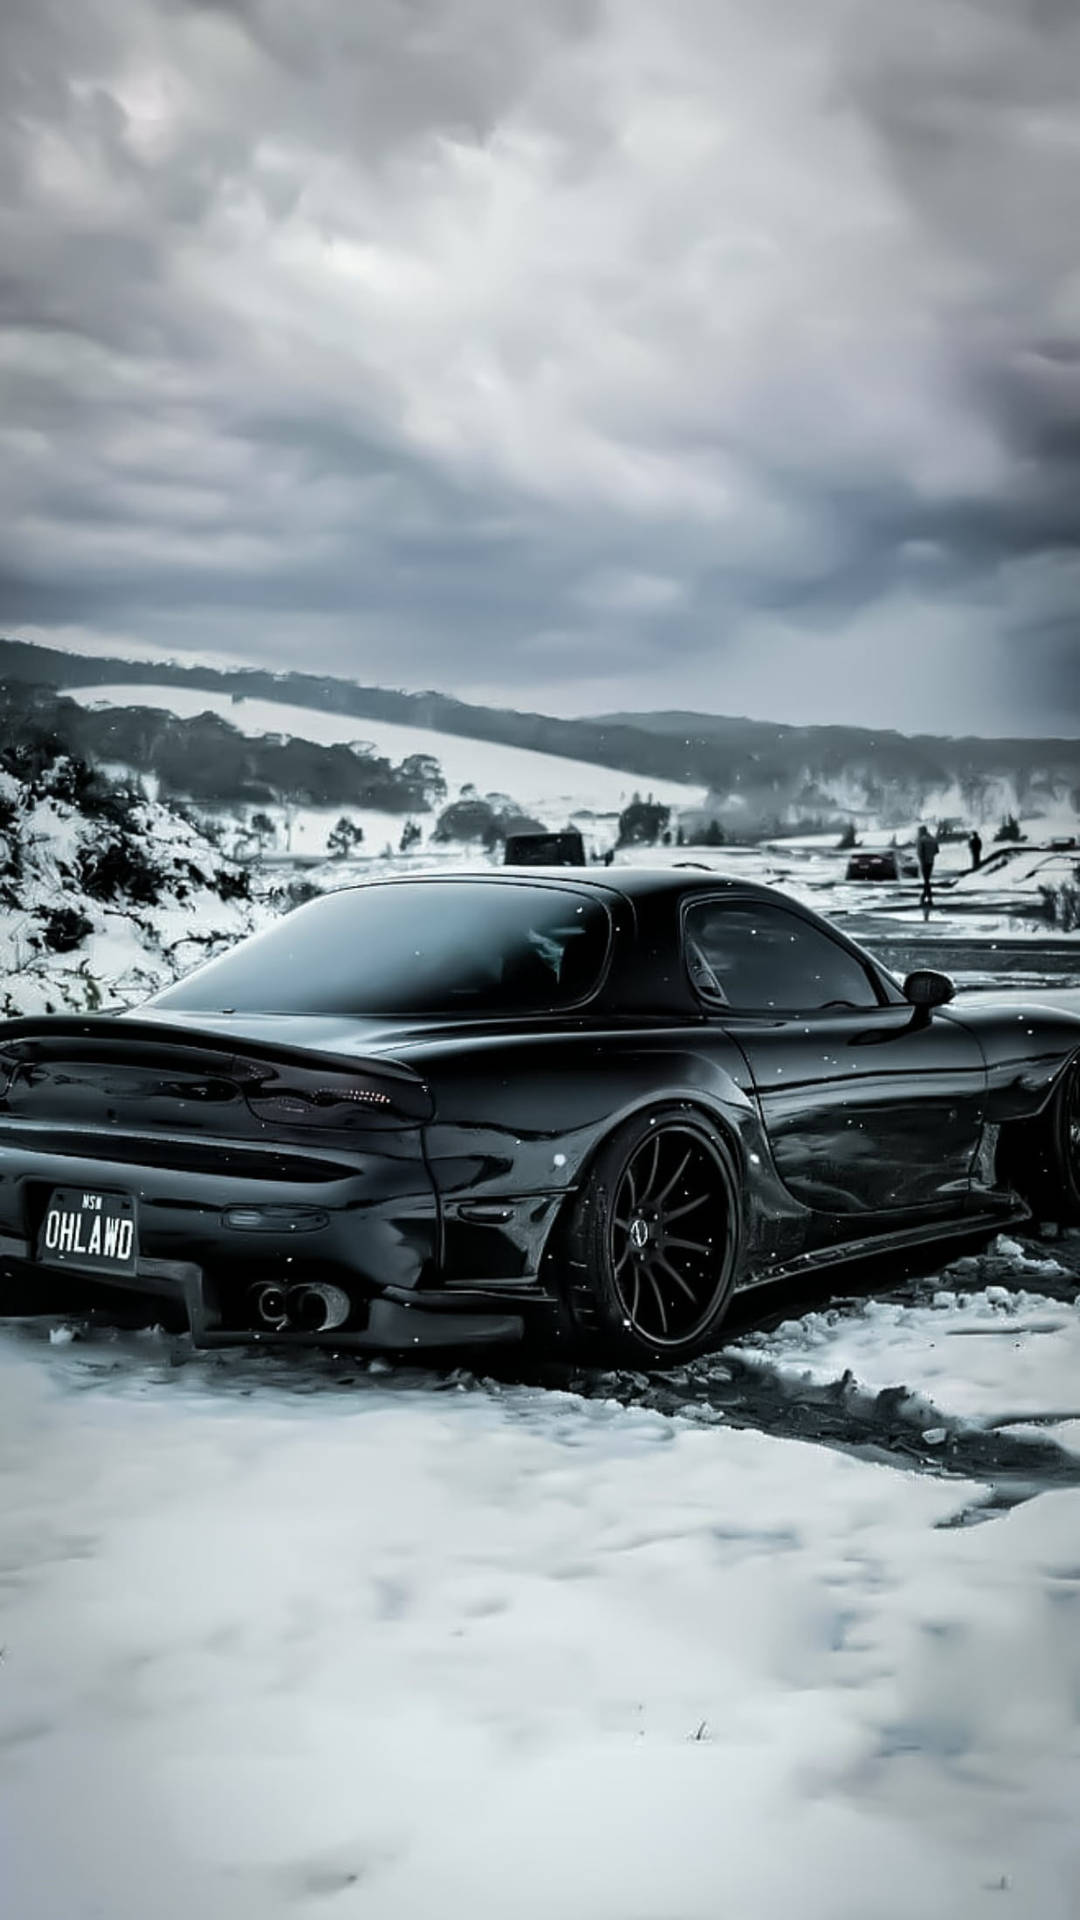 100+] Rx7 Wallpapers | Wallpapers.com